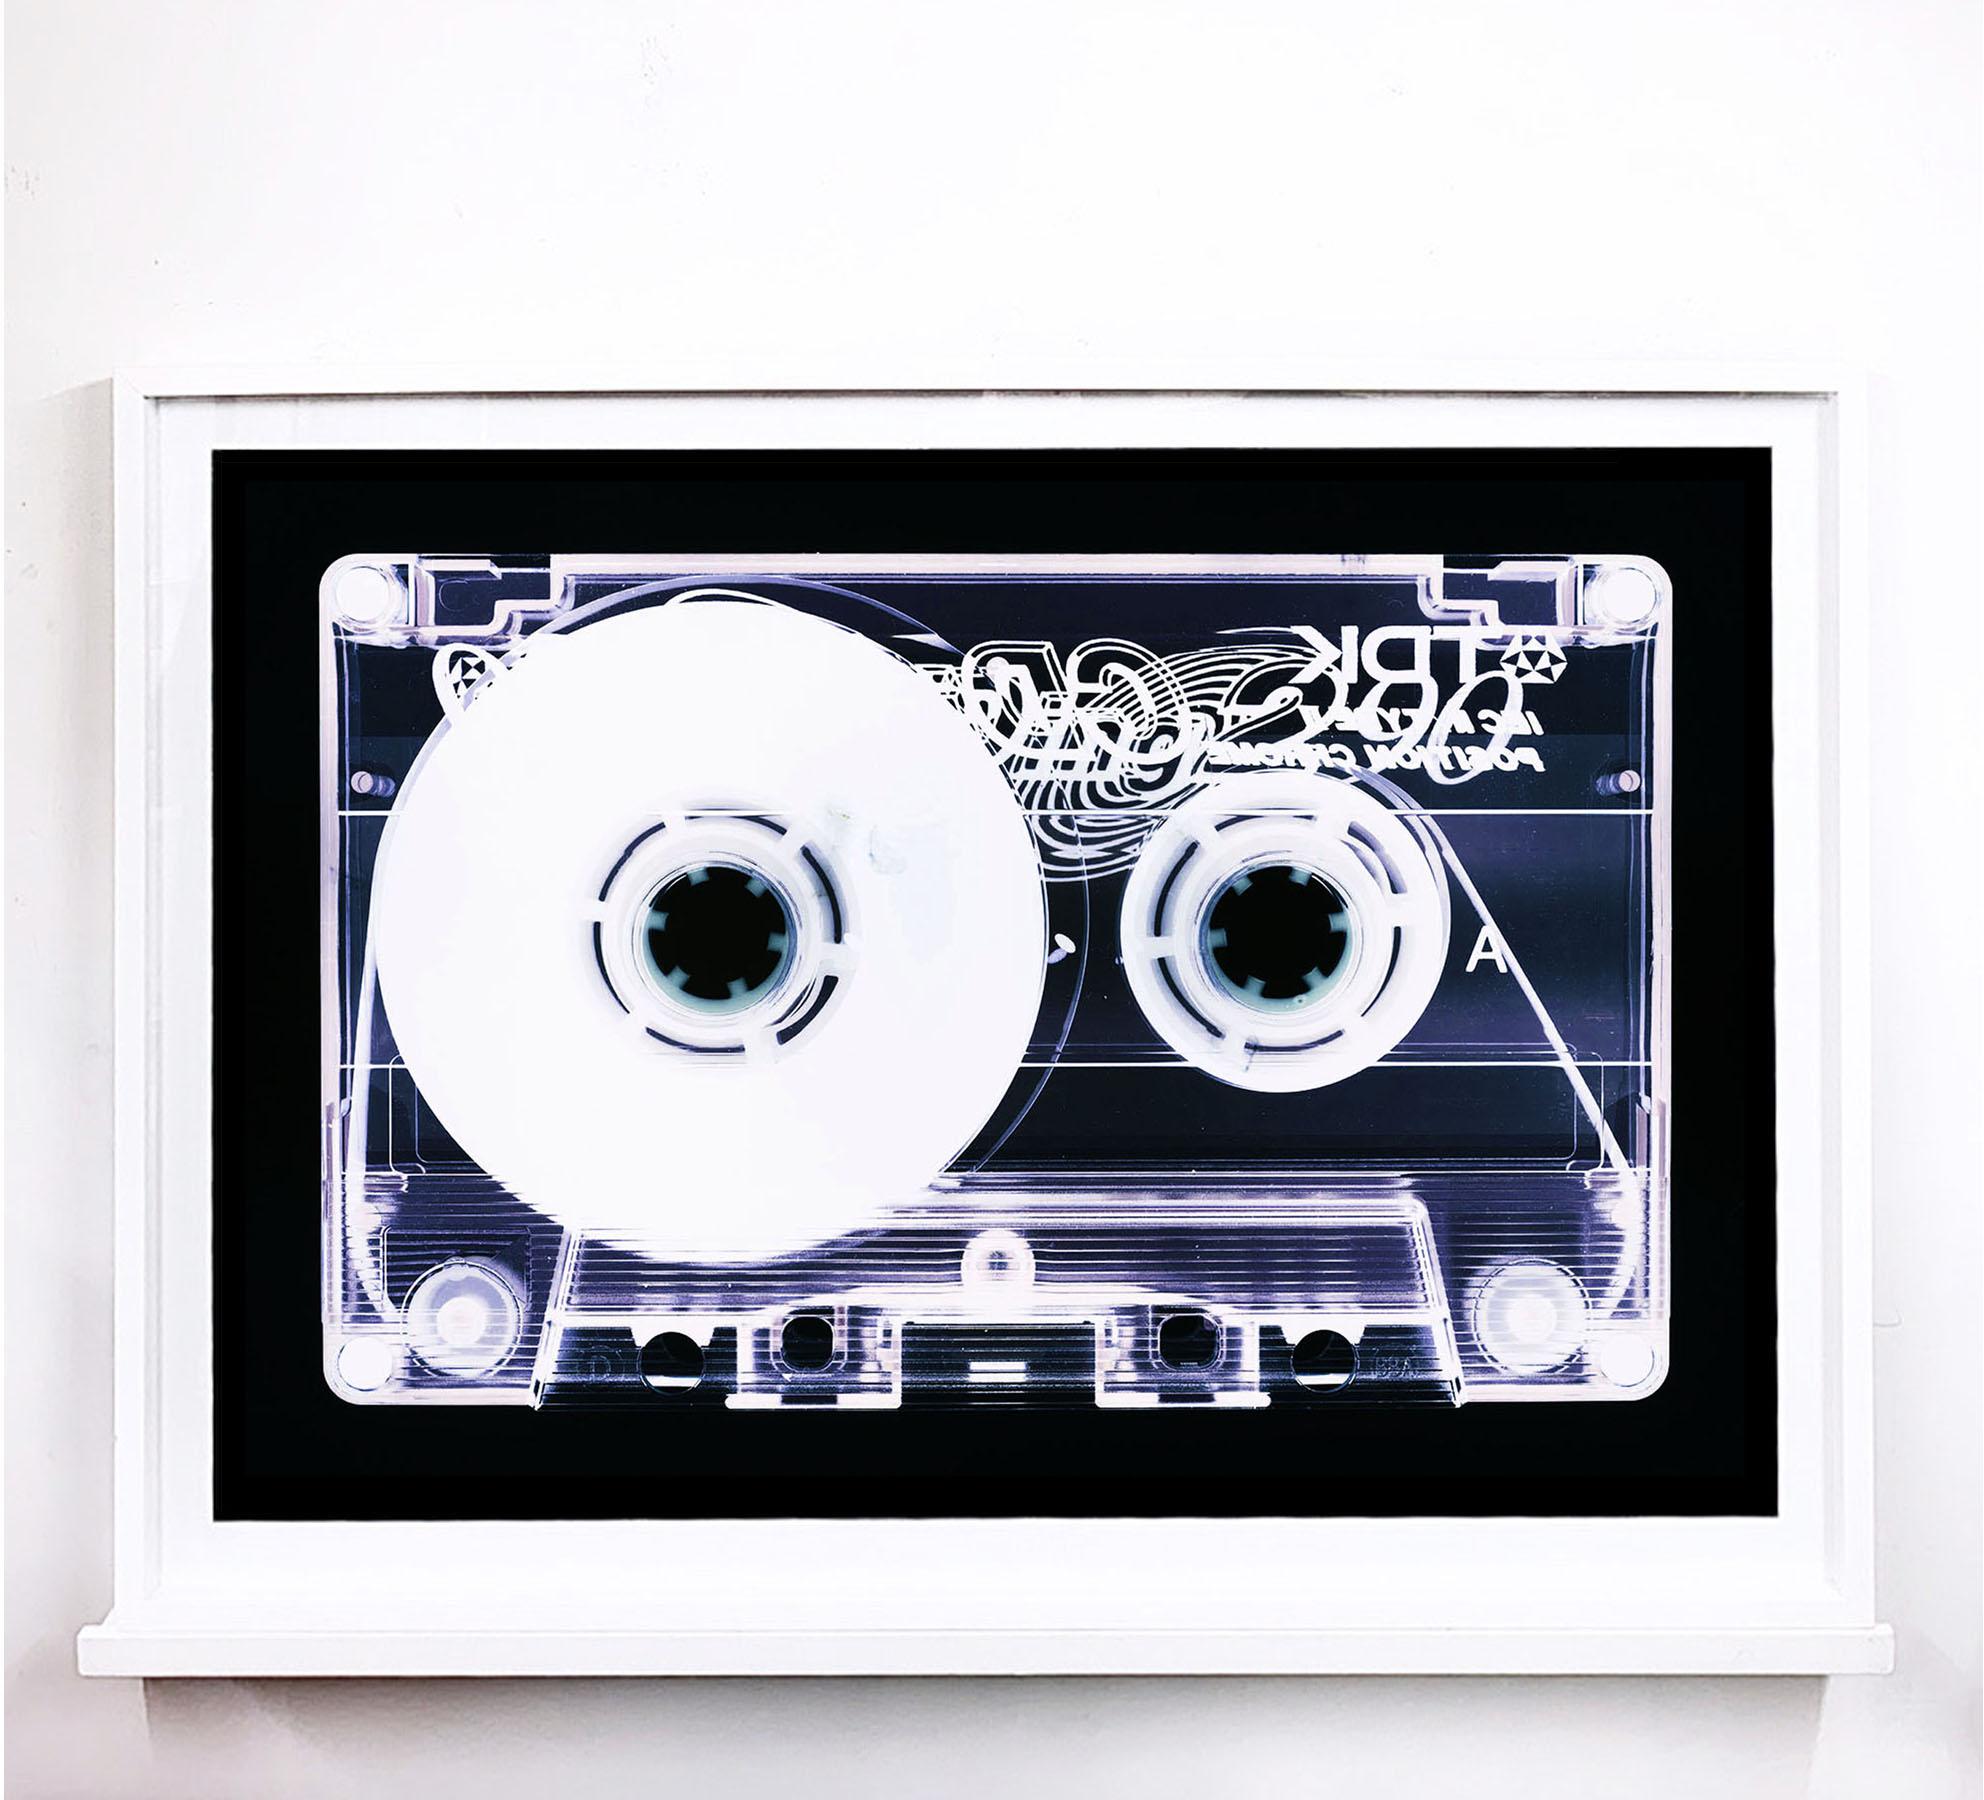 Tape Collection - Blank Tape Side A - Conceptual Color Music Pop Art - Black Print by Heidler & Heeps